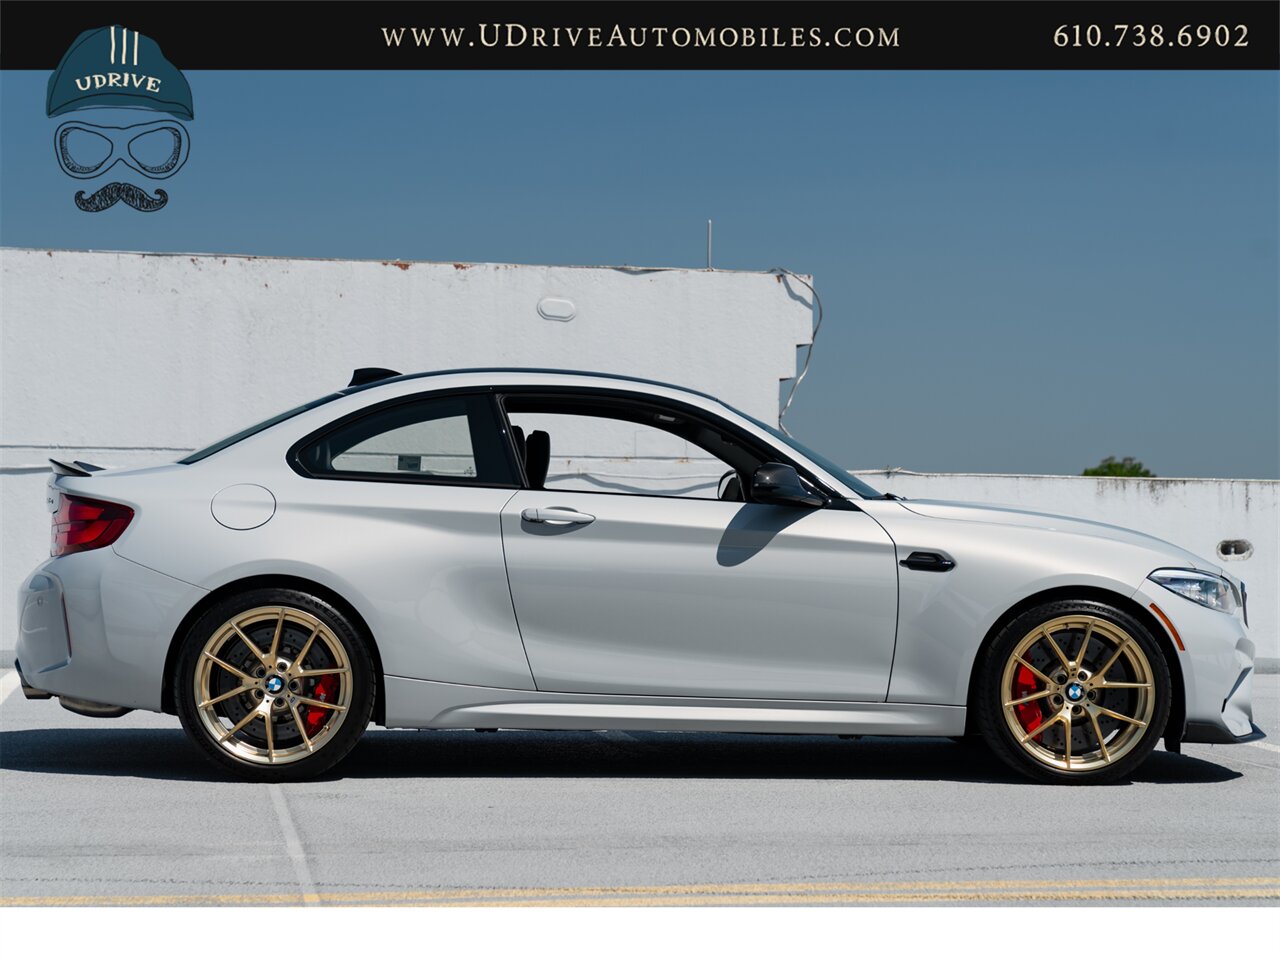 2020 BMW M2 CS  M2 CS 6 Speed Manual 2k Miles Full Body PPF Factory Warranty until 2025 - Photo 17 - West Chester, PA 19382